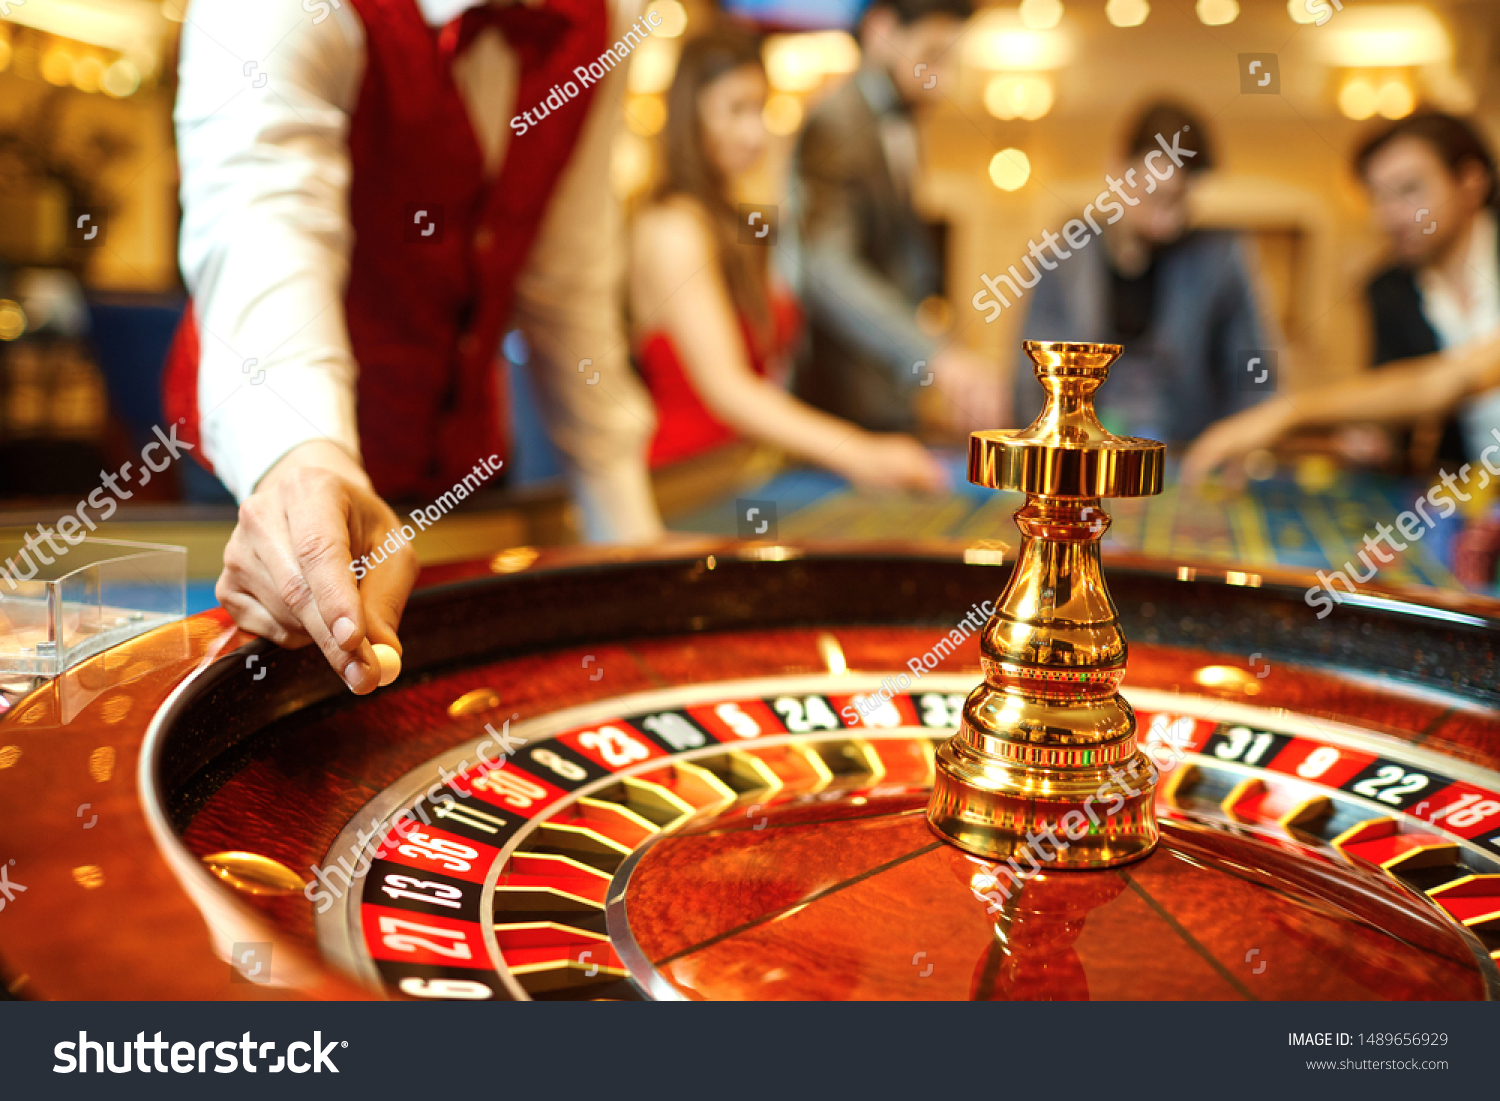 The croupier holds a roulette ball in a casino in his hand. #1489656929